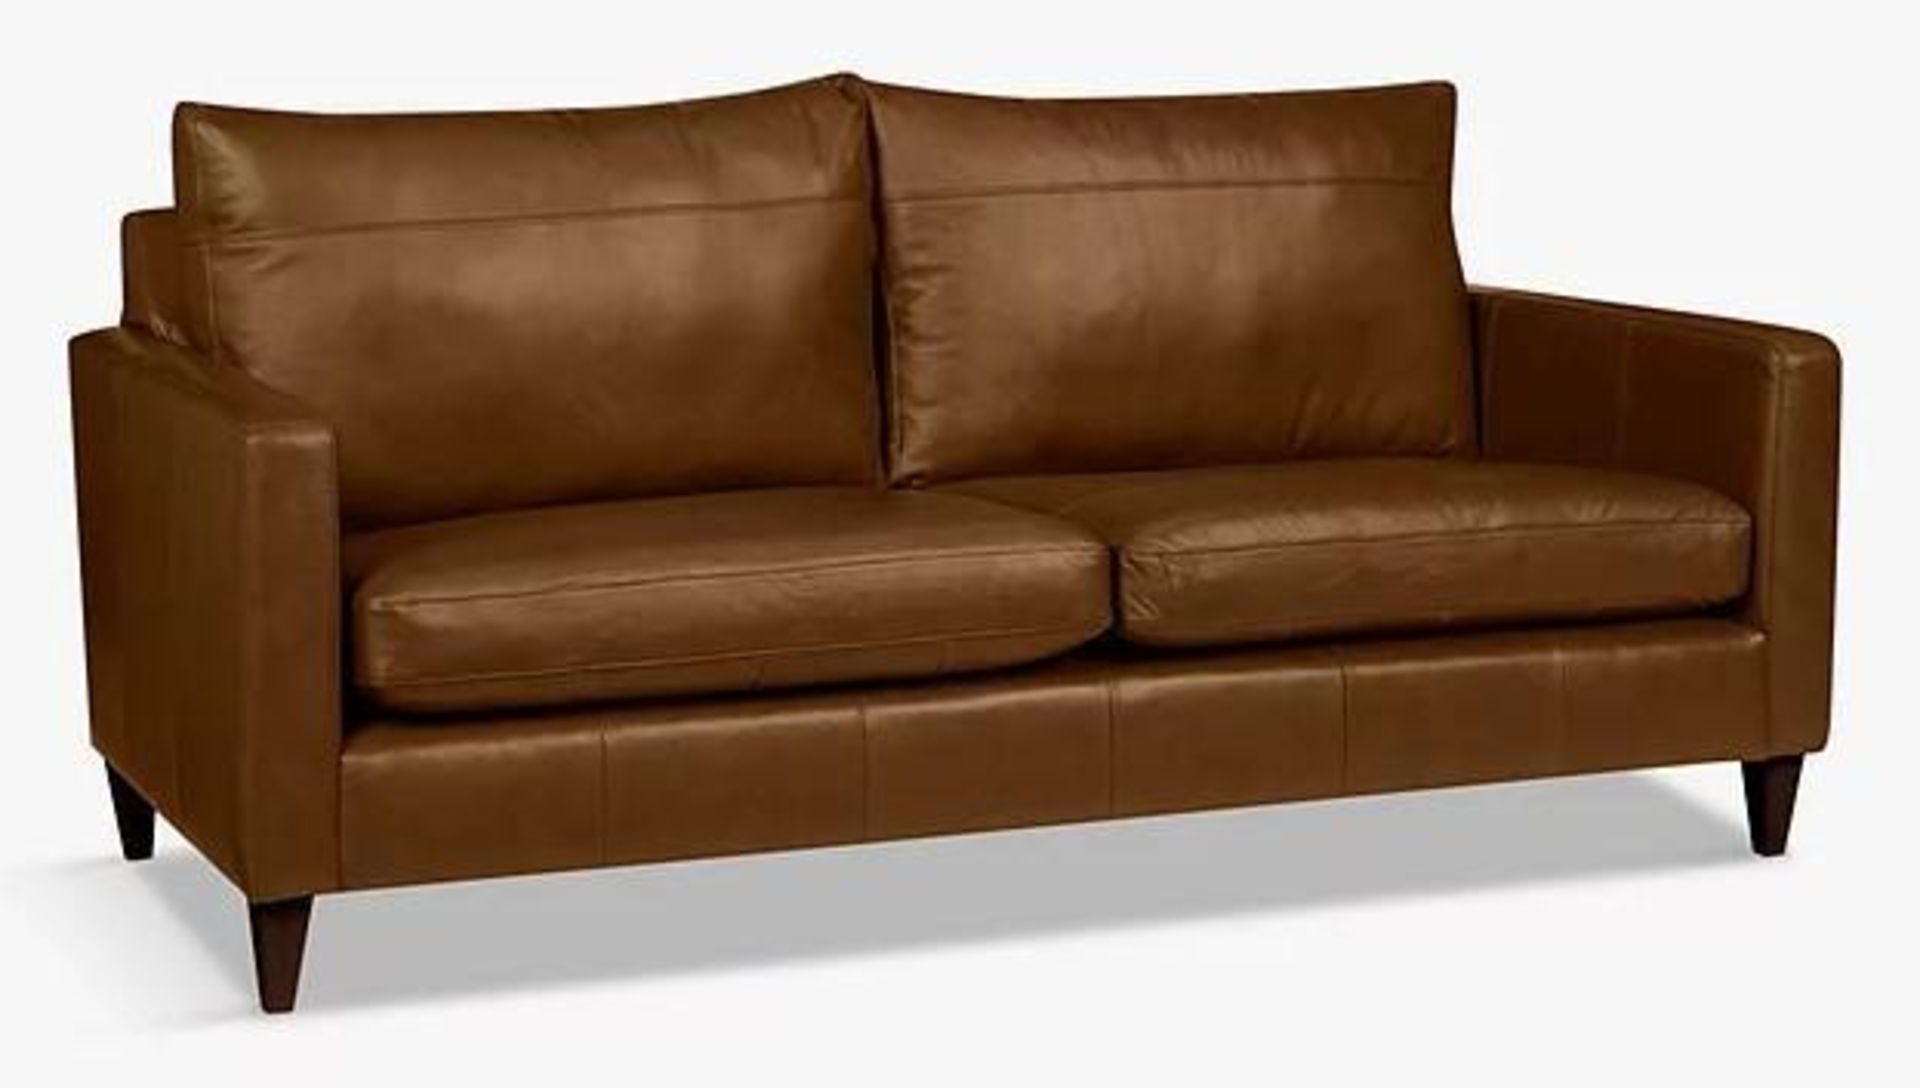 BRAND NEW John Lewis Bailey full leather 3 seater sofa in Tan. RRP: £1,699.00 - Image 3 of 4